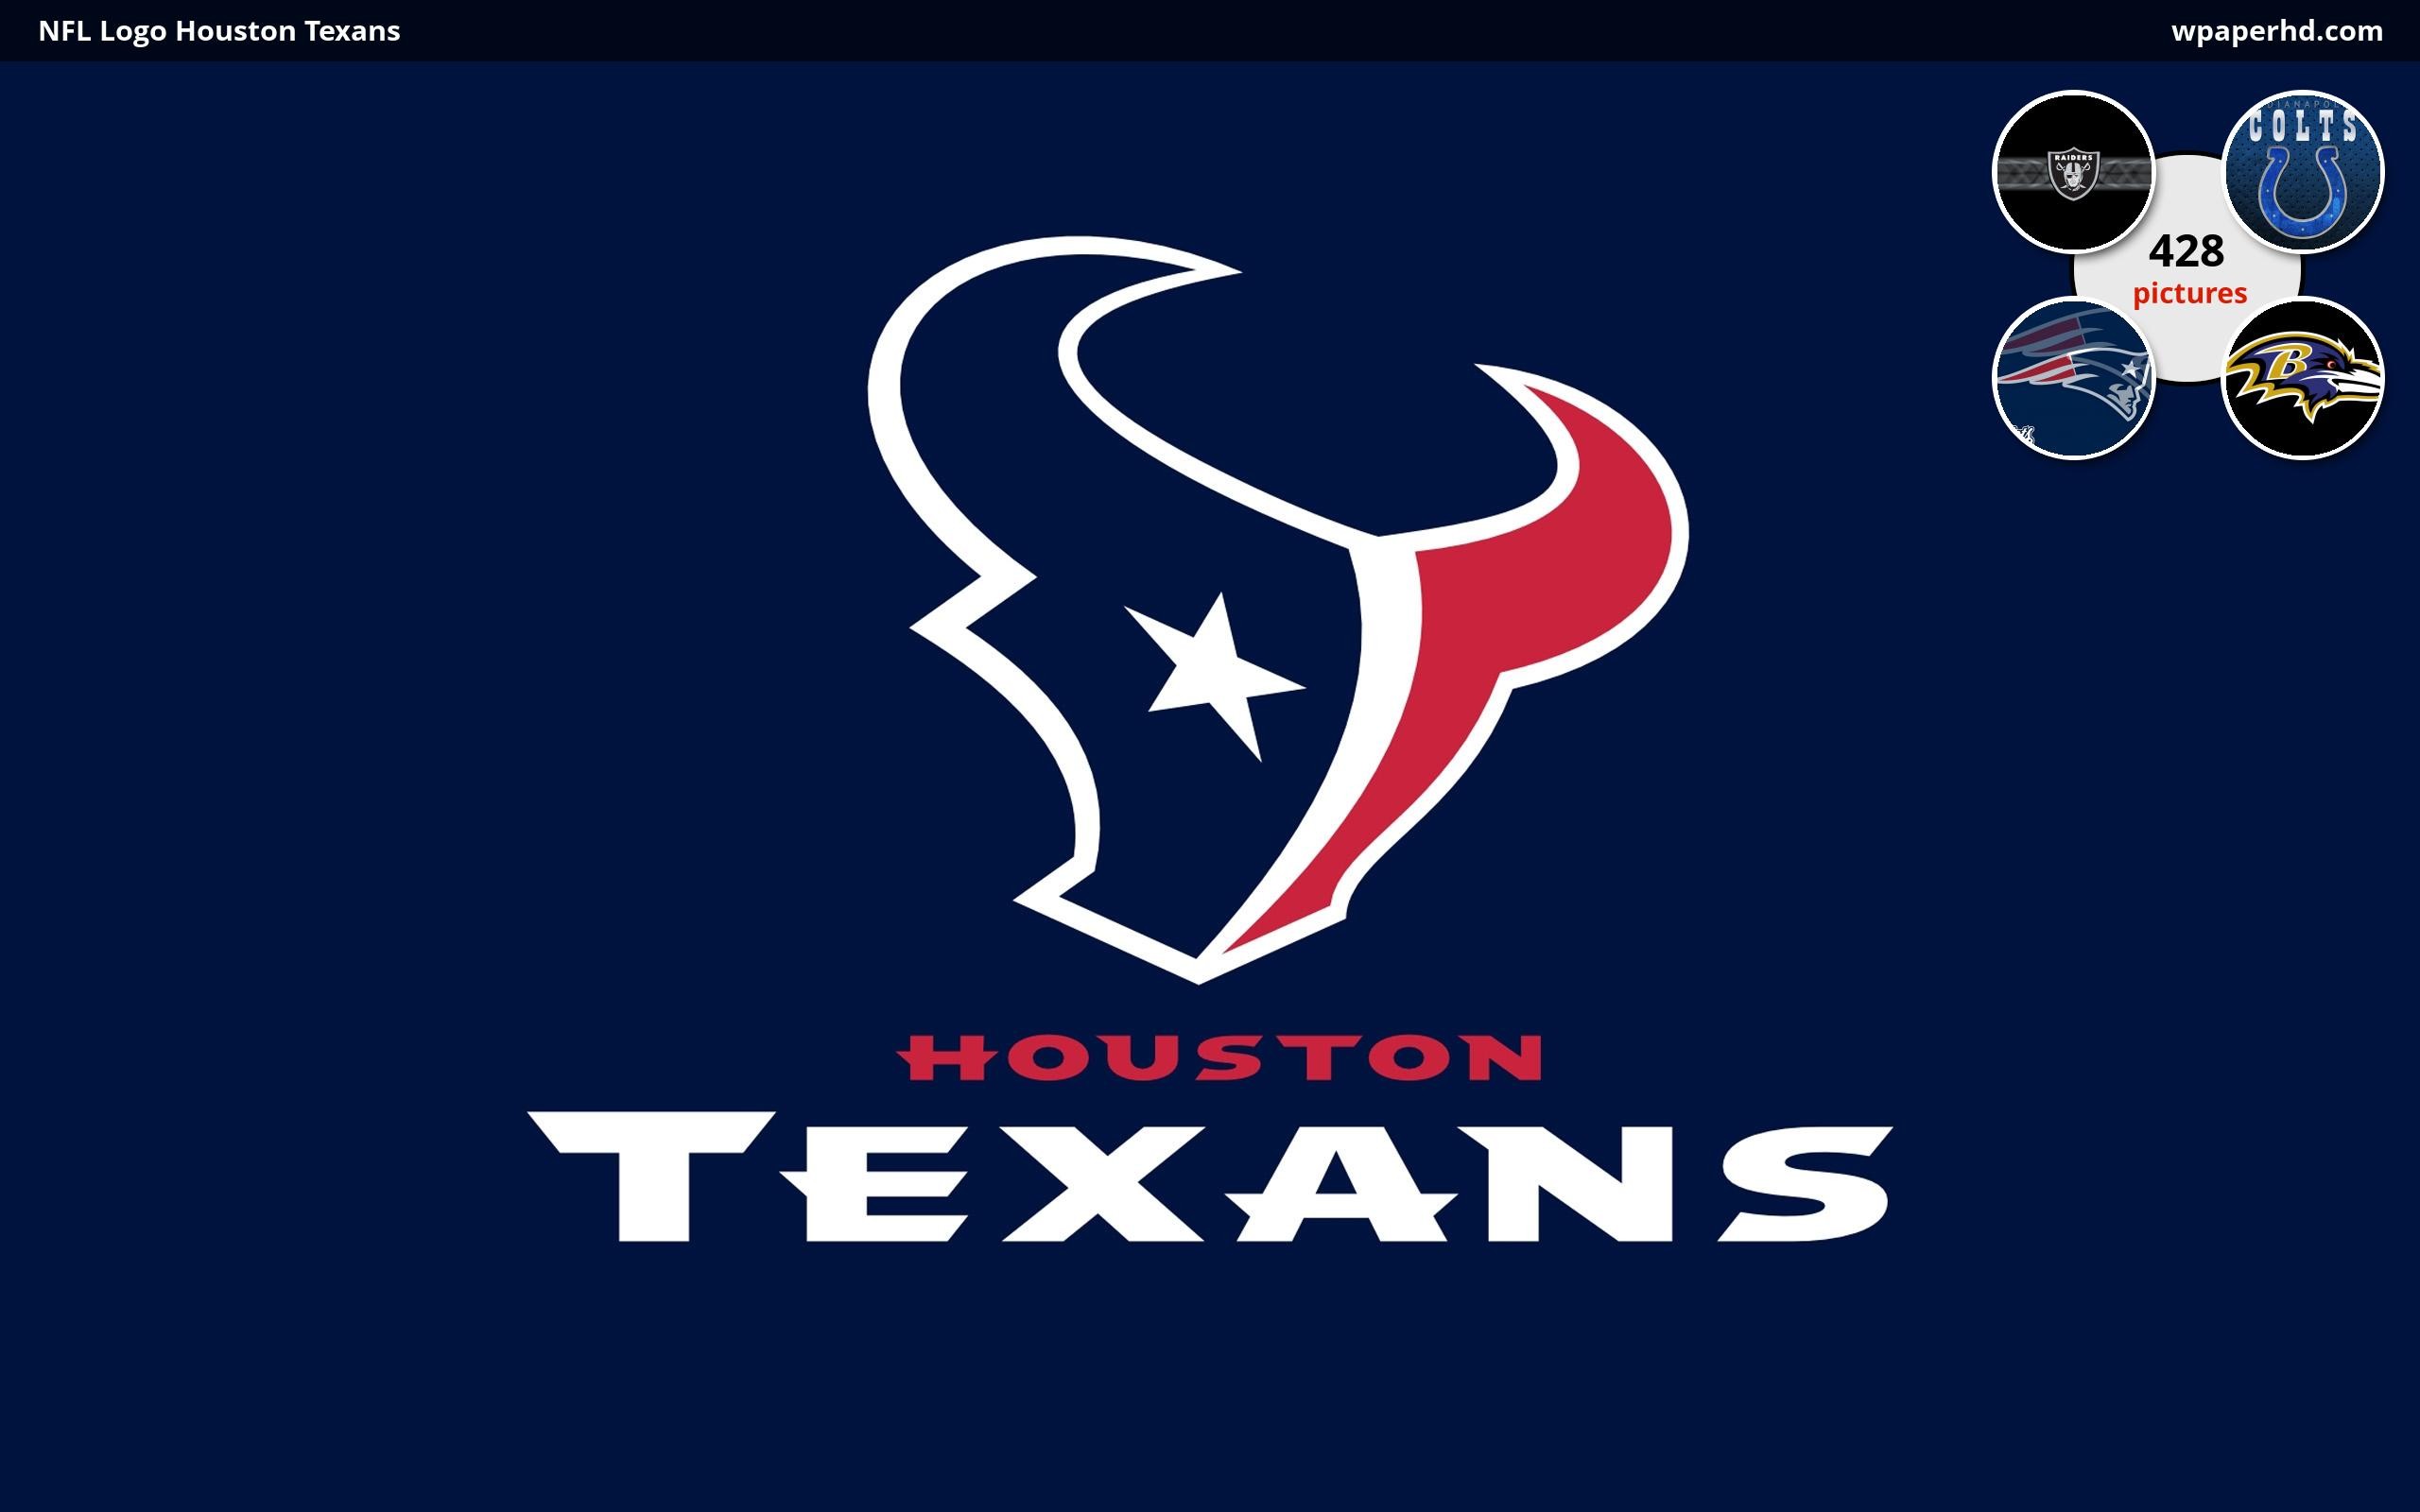 2560x1600, You Are On Page With Nfl Logo Houston Texans - Transparent Houston Texans Logo - HD Wallpaper 